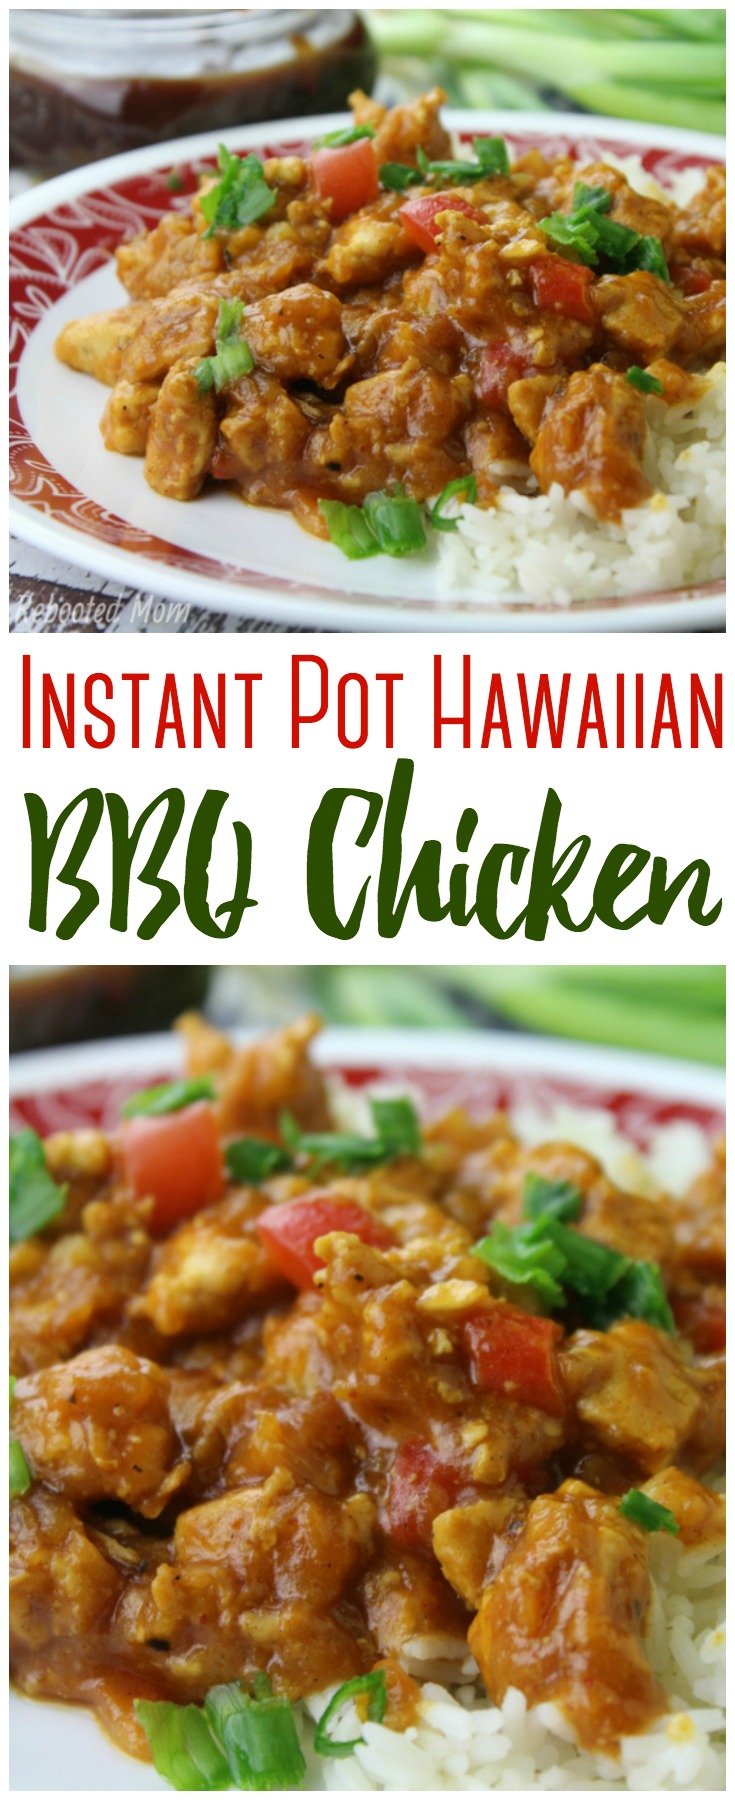 Skip expensive restaurant take-out and eat dinner at home! This Instant Pot Hawaiian BBQ Chicken is made with simple ingredients in less than 20 minutes!   